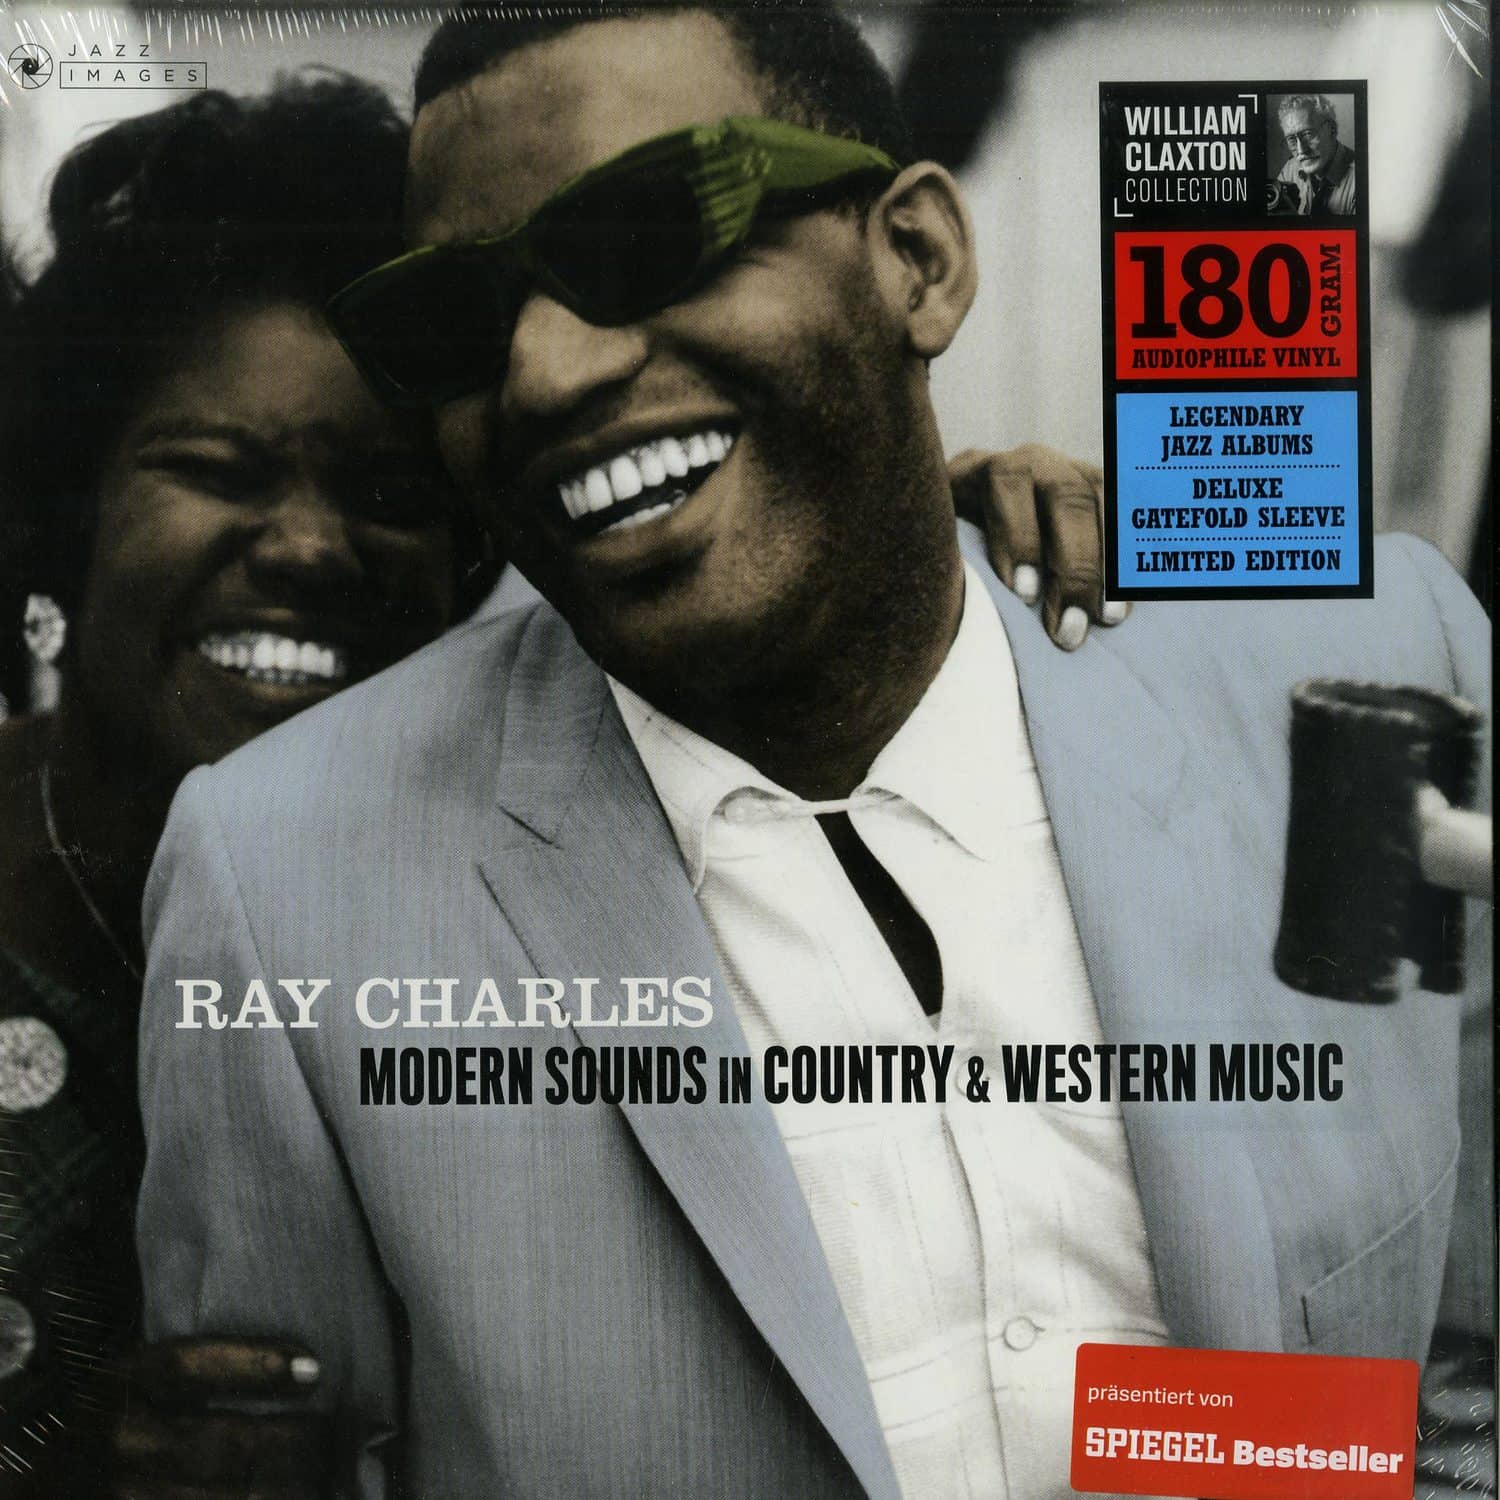 Ray Charles - MODERN SOUNDS IN COUNTRY & WESTERN MUSIC 